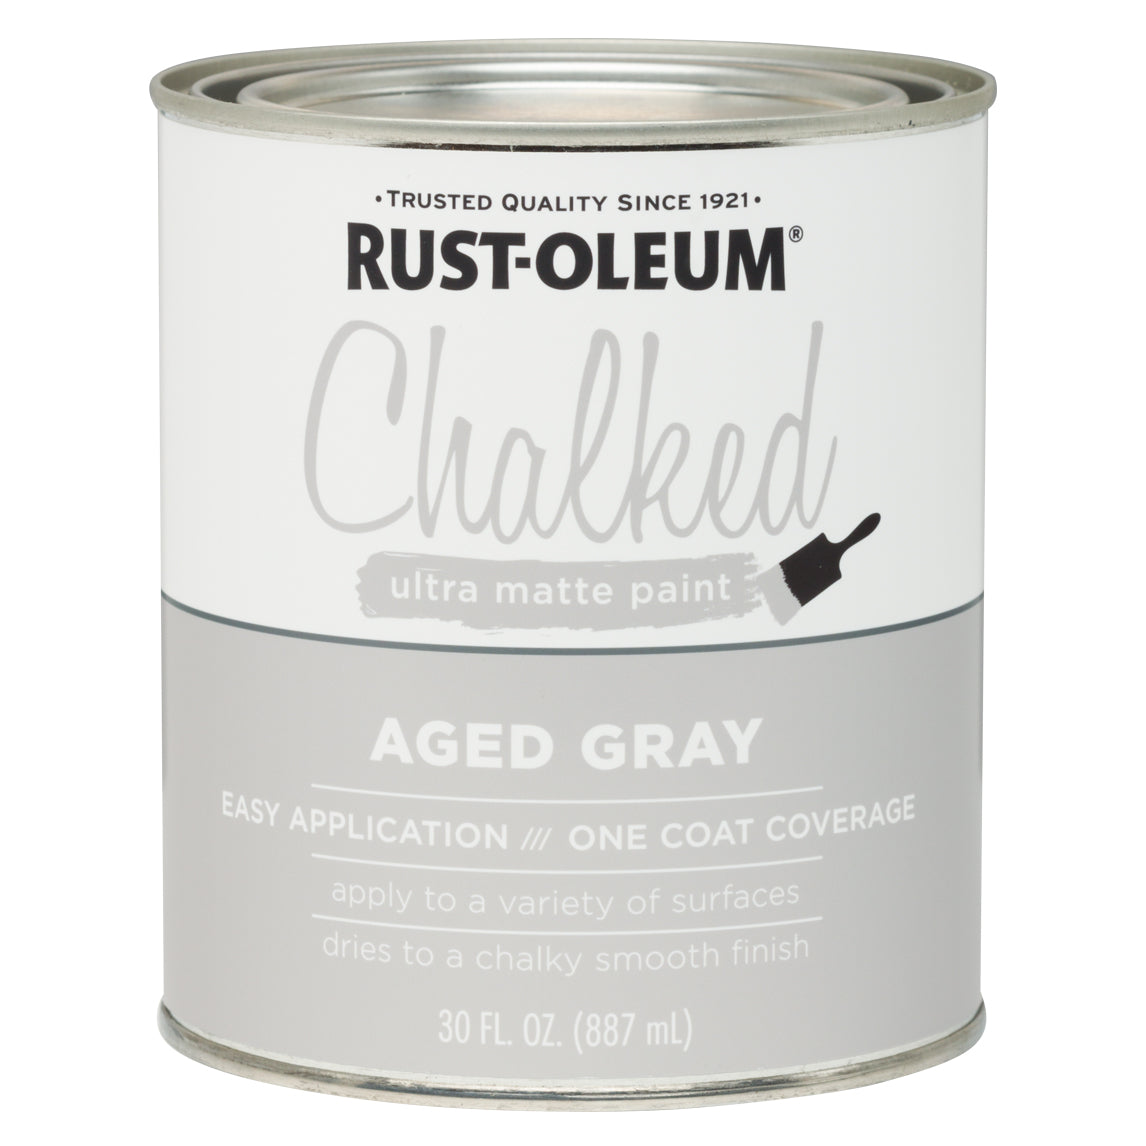 Chalked Paint